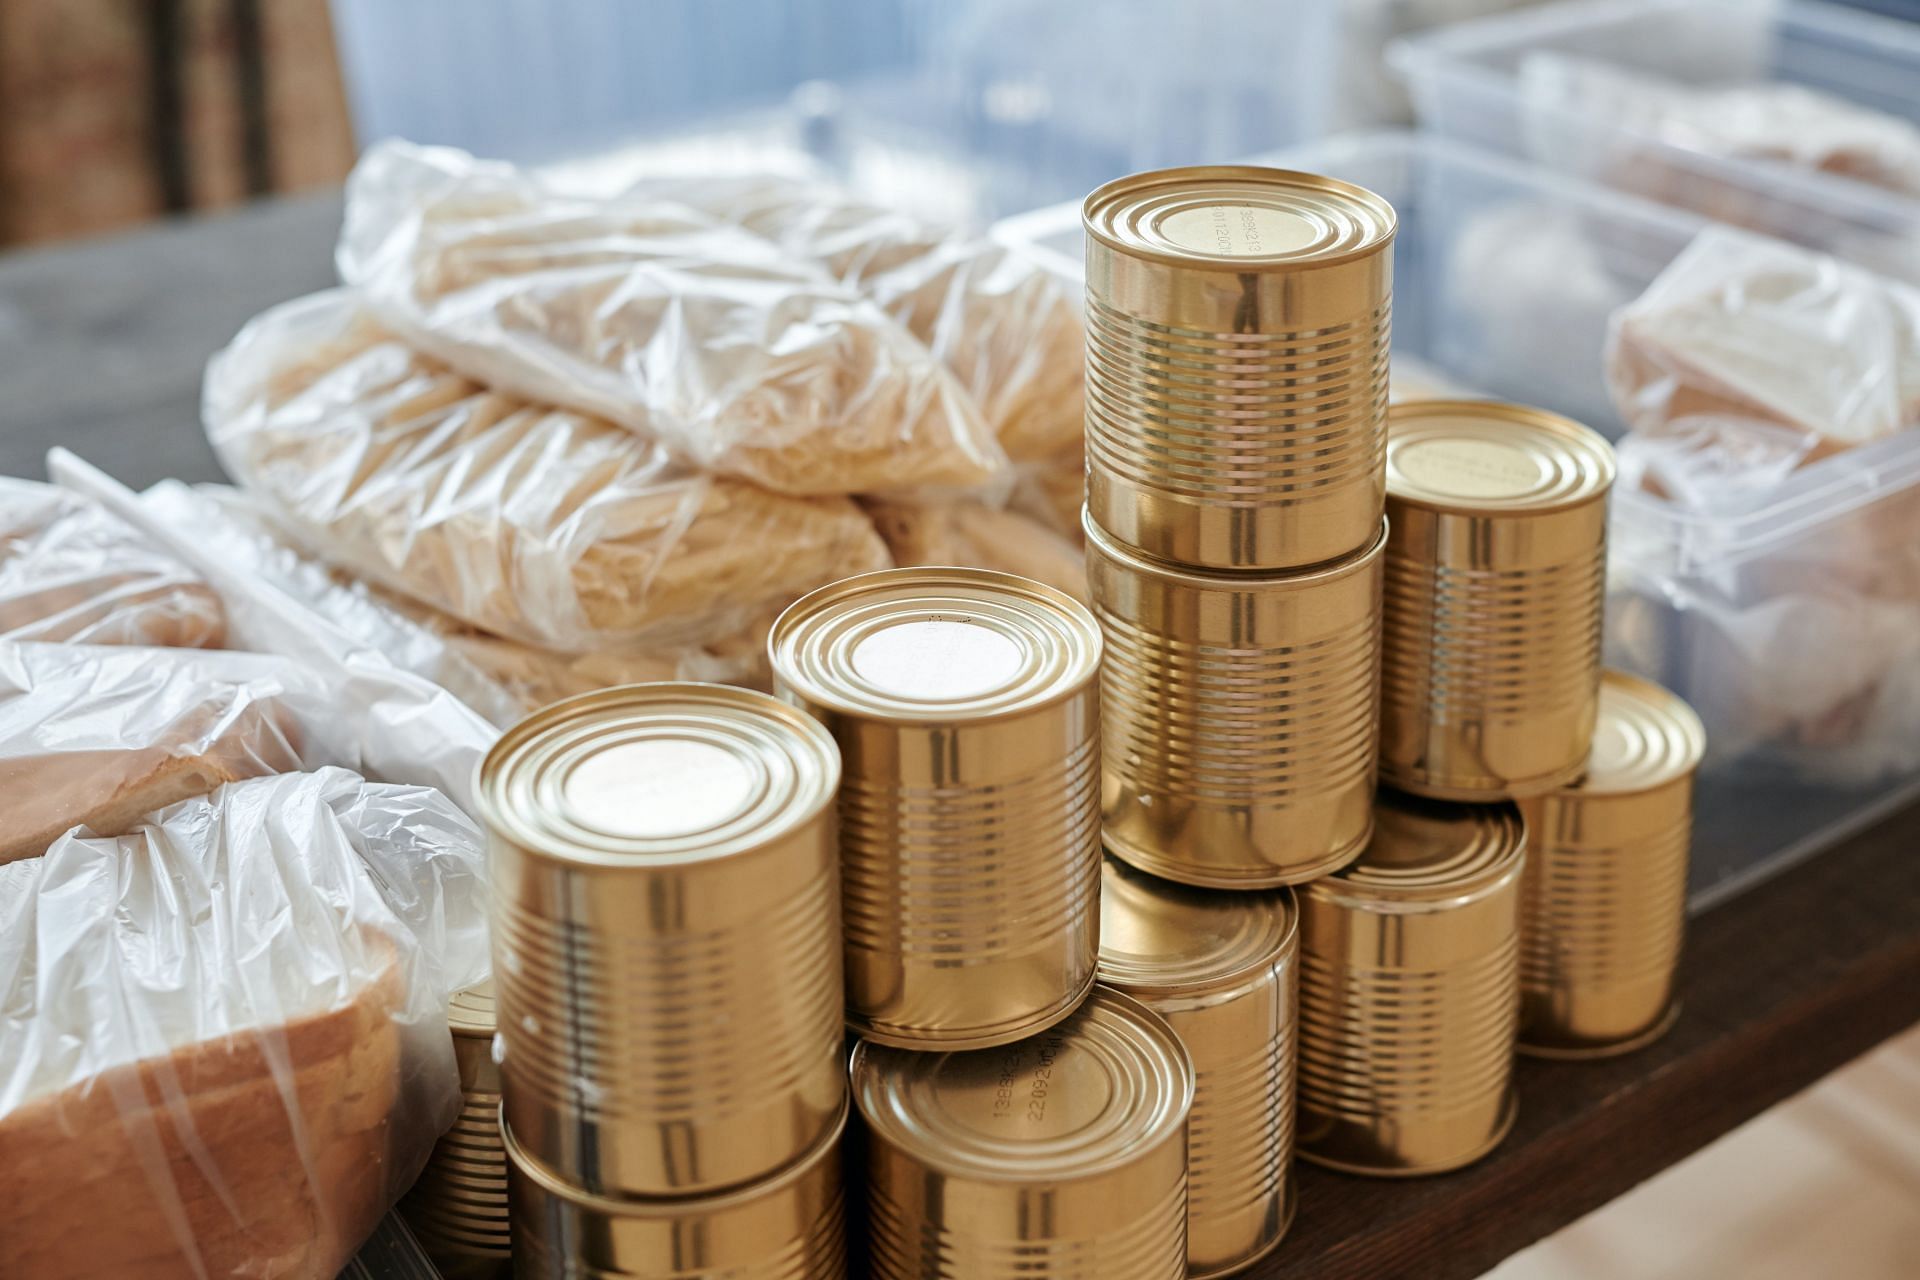 Canned foods are high in sodium content (Image via Pexels/Julia Cameron)